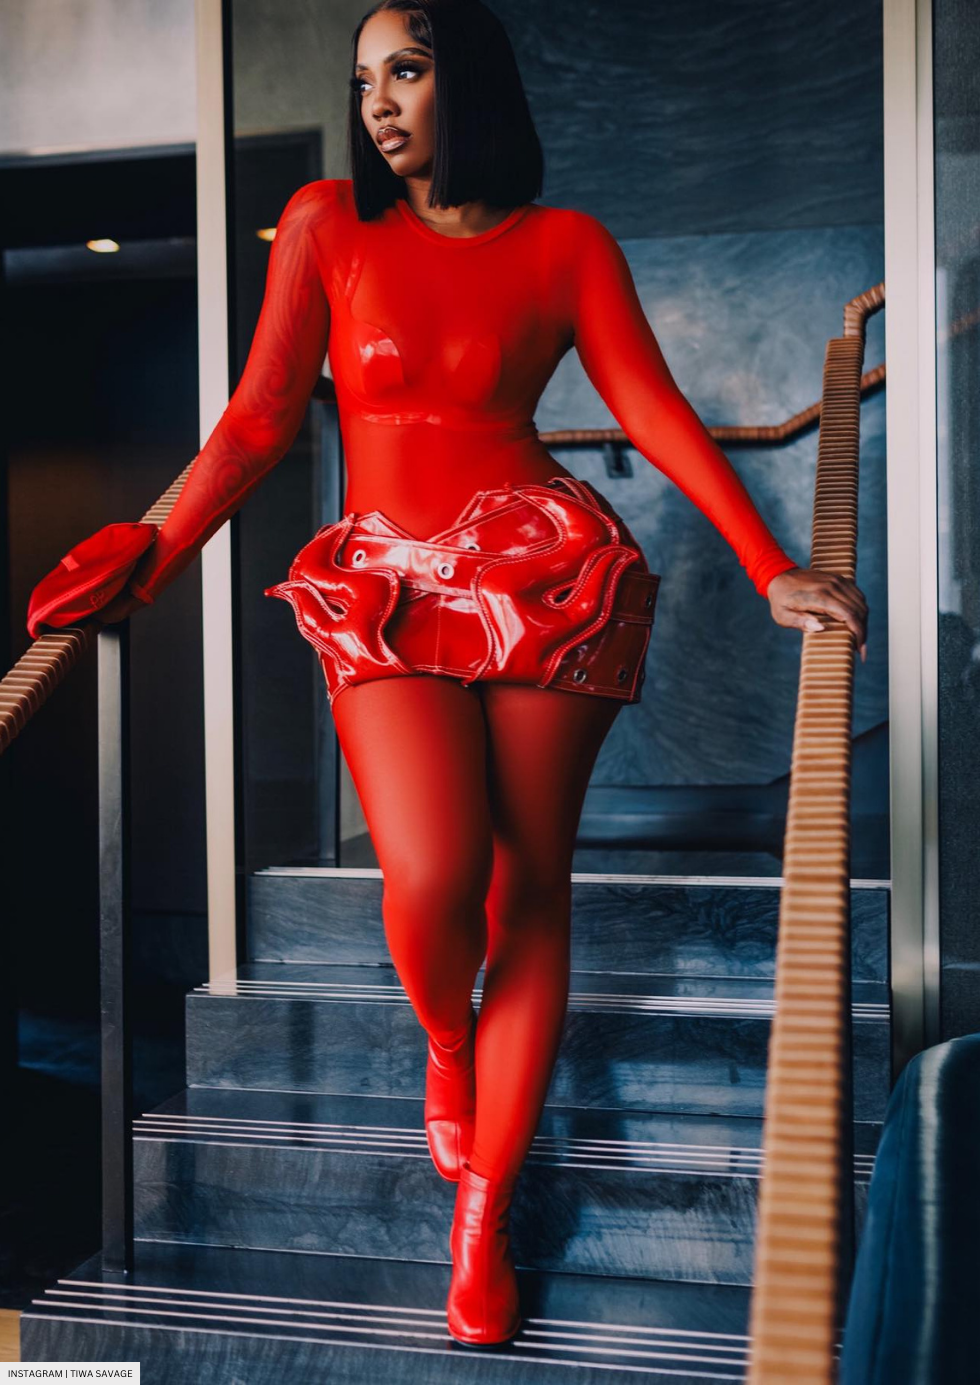 Tiwa’s all red outfit